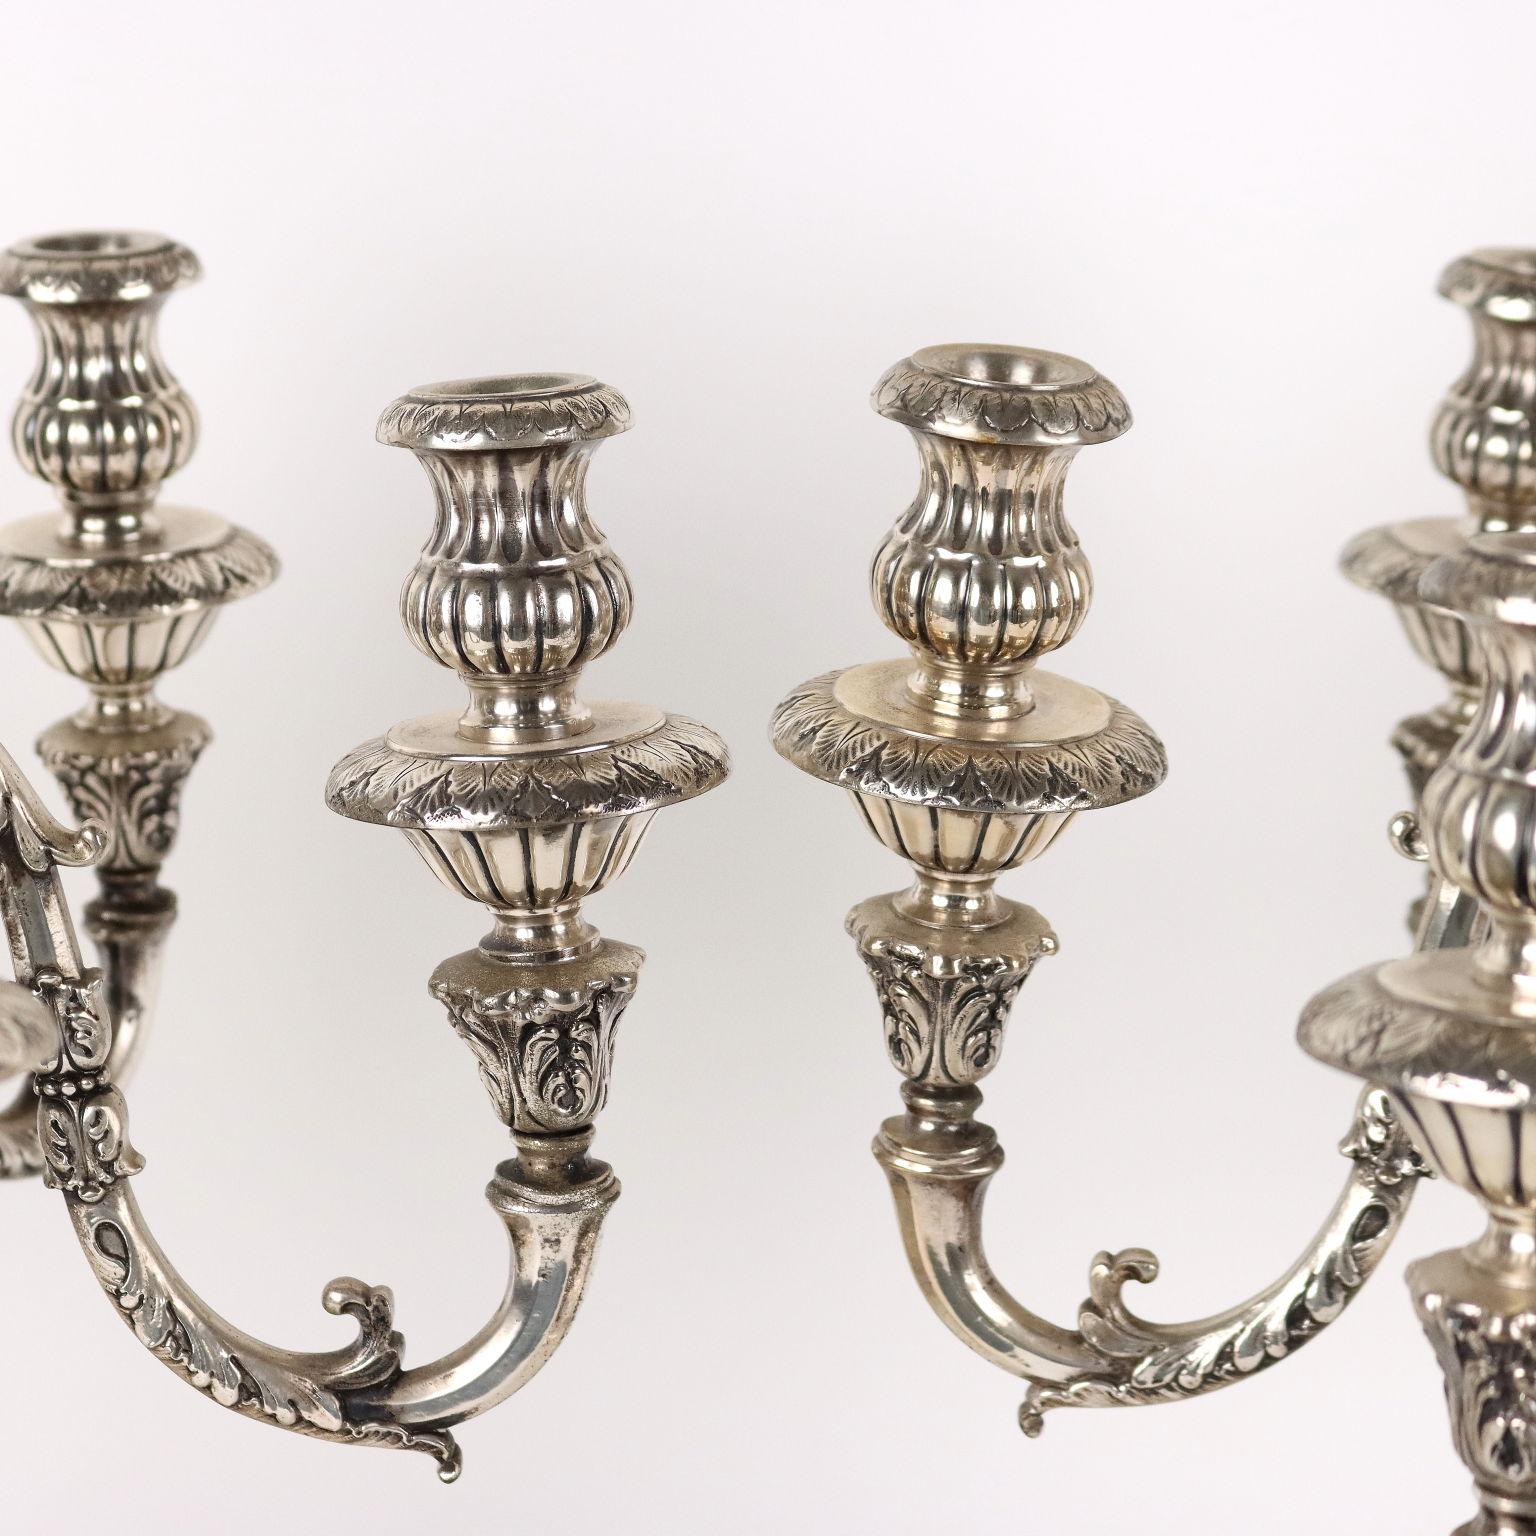 Other Pair of Seven-Armed Silver Candelabra